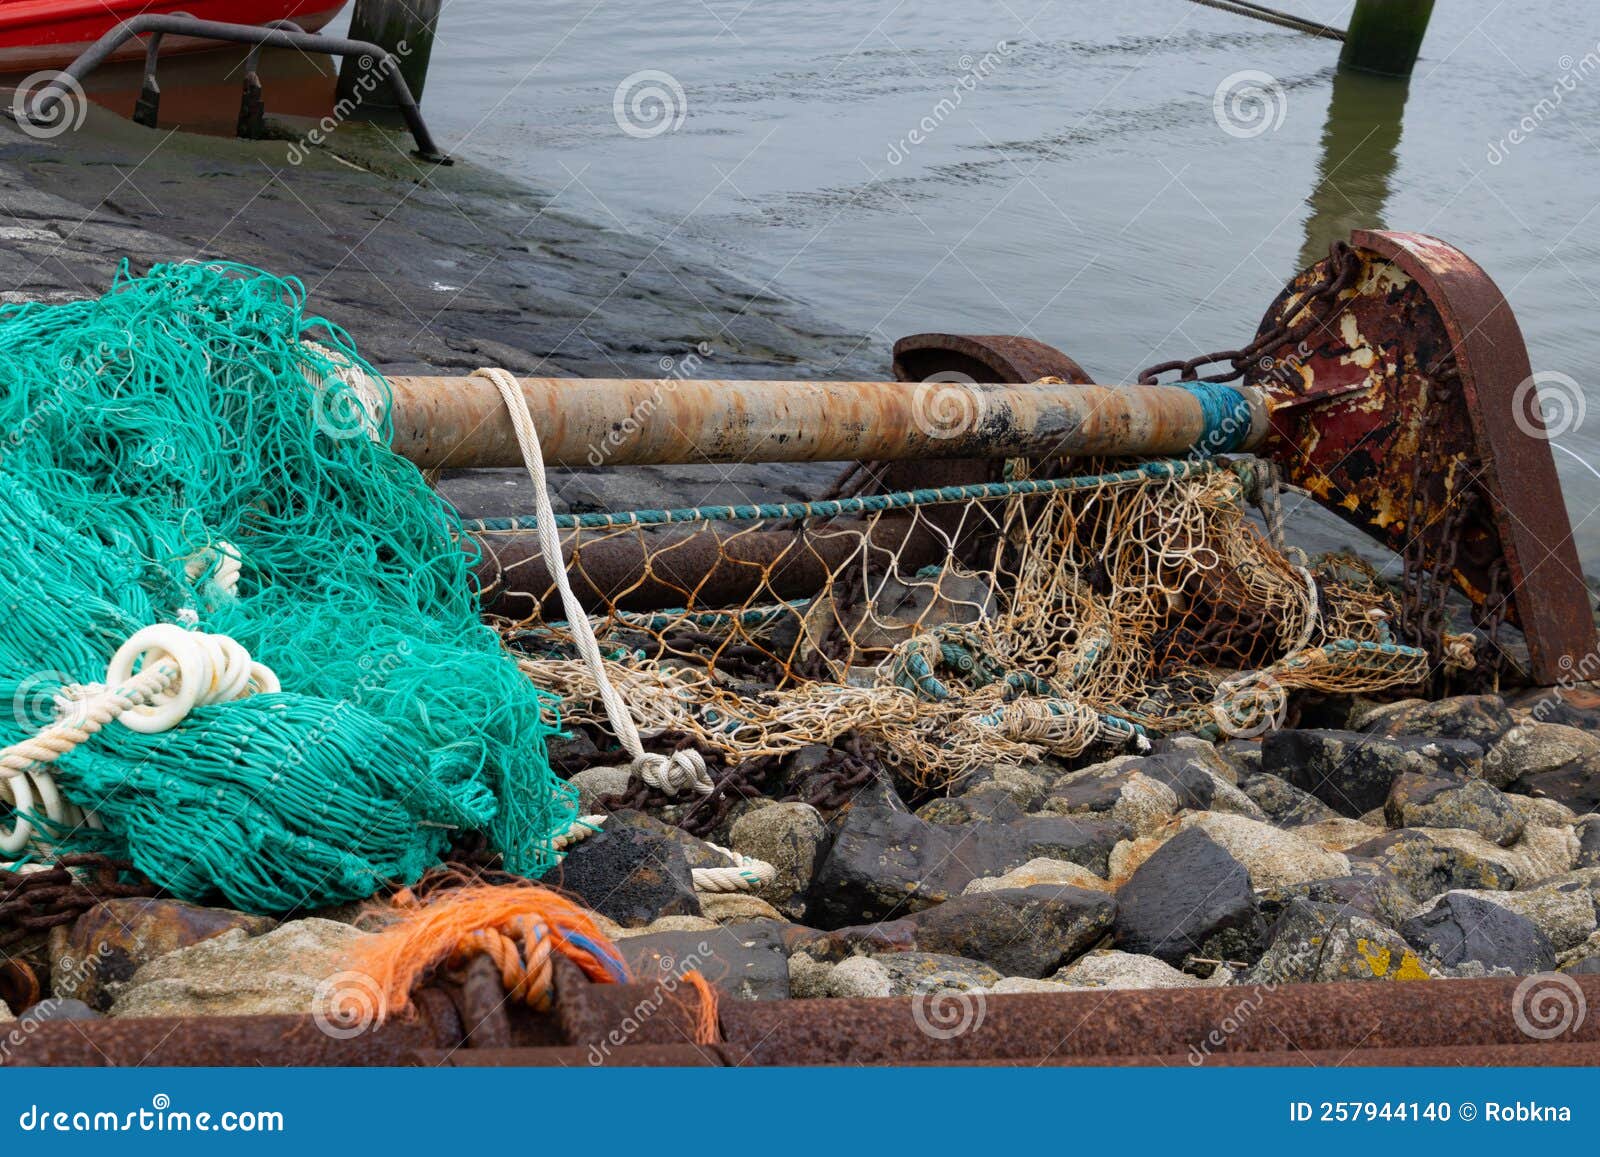 https://thumbs.dreamstime.com/z/dirty-old-fishing-net-dock-dirty-old-fishing-net-dock-257944140.jpg